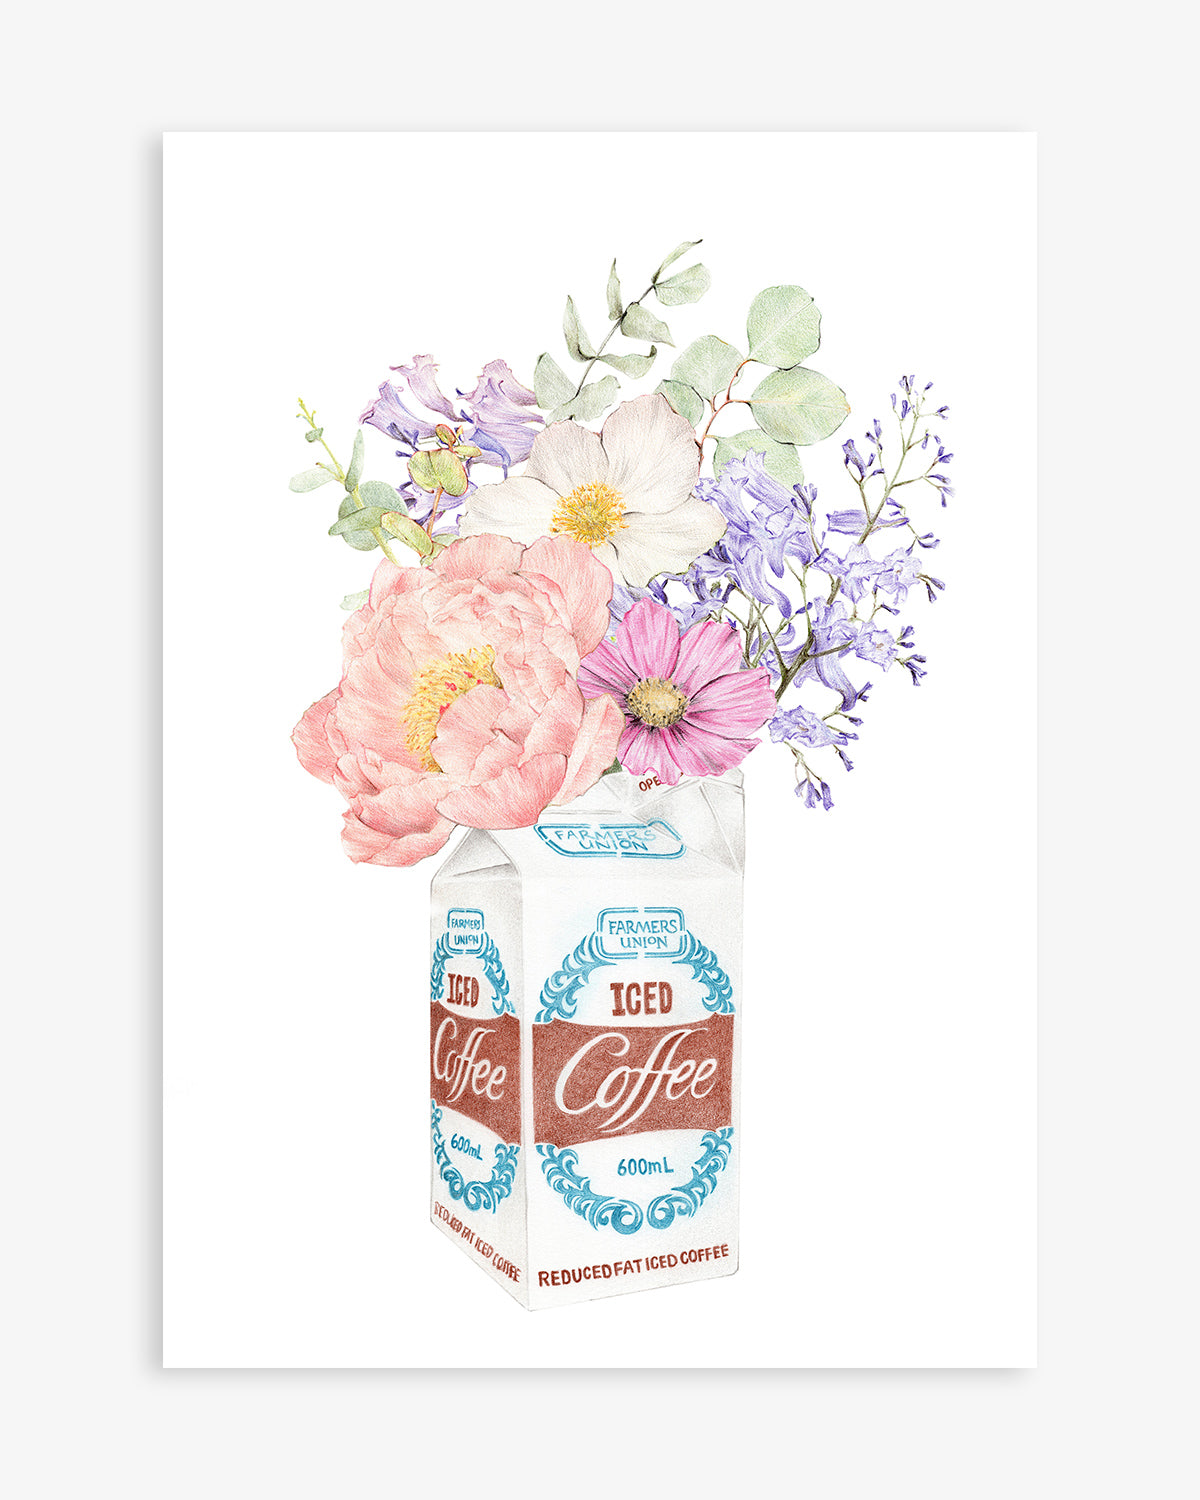 Farmers Union Iced Coffee with florals art print